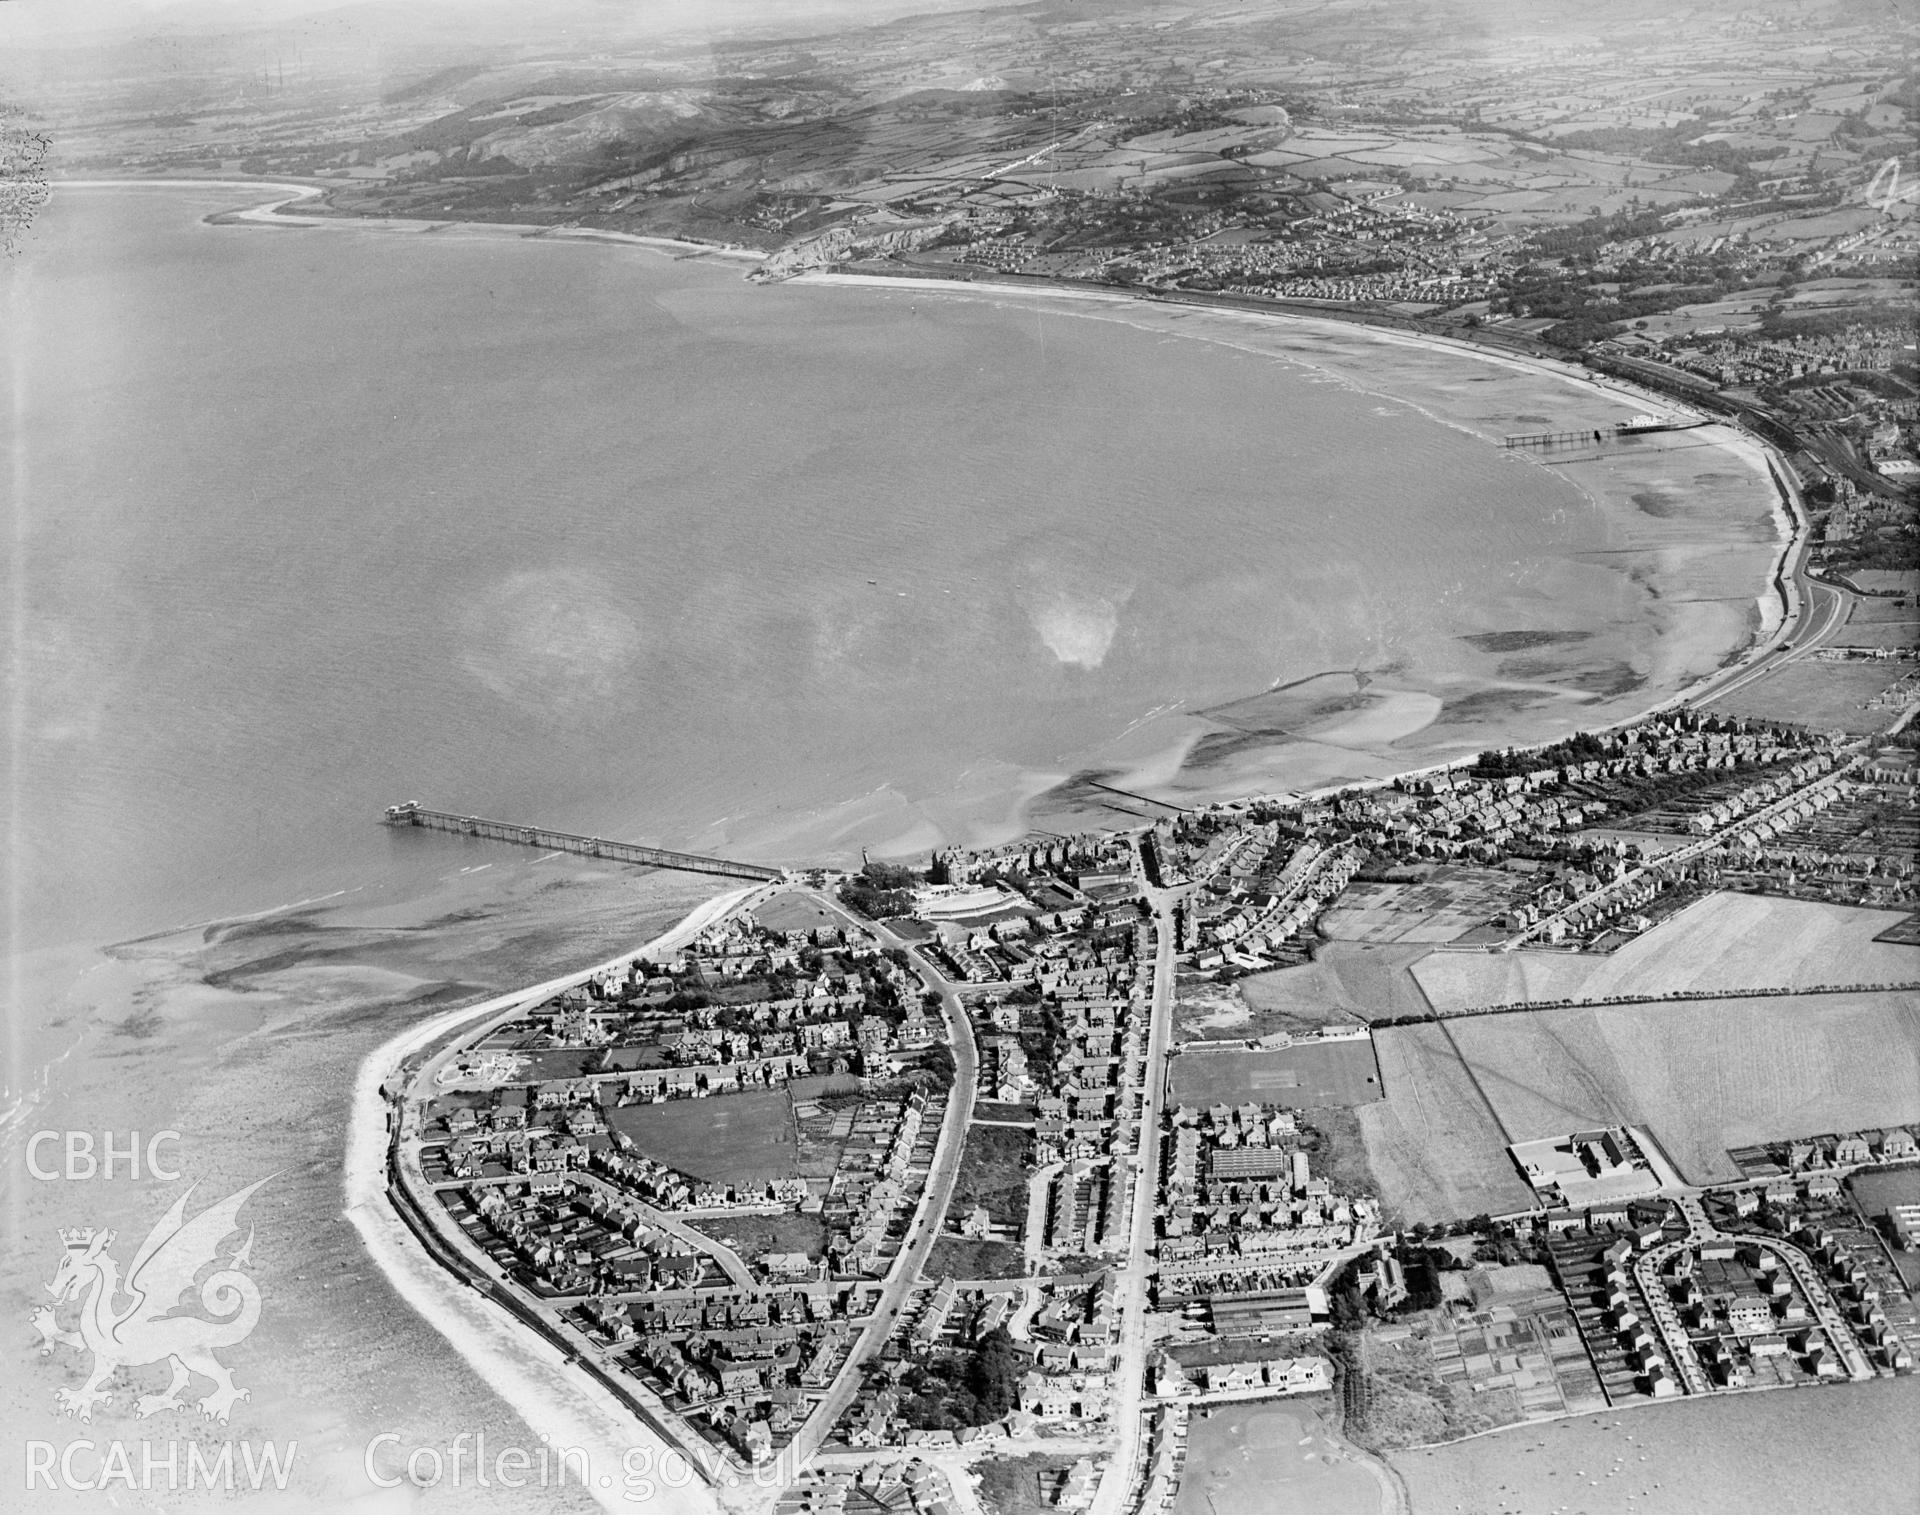 View of Colwyn Bay, oblique aerial view. 5?x4? black and white glass plate negative.